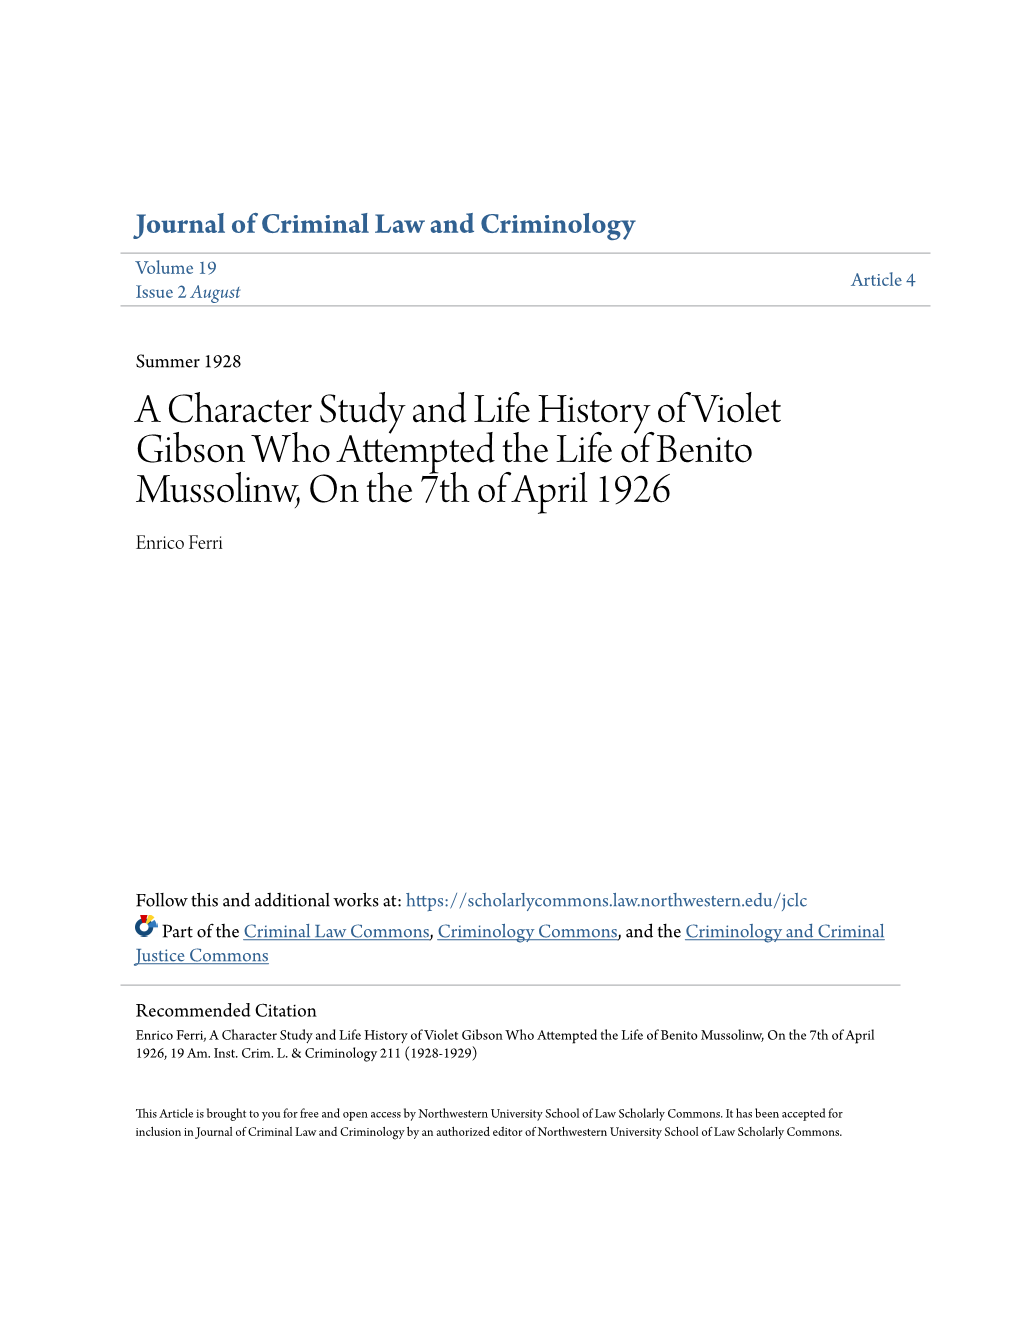 A Character Study and Life History of Violet Gibson Who Attempted the Life of Benito Mussolinw, on the 7Th of April 1926 Enrico Ferri